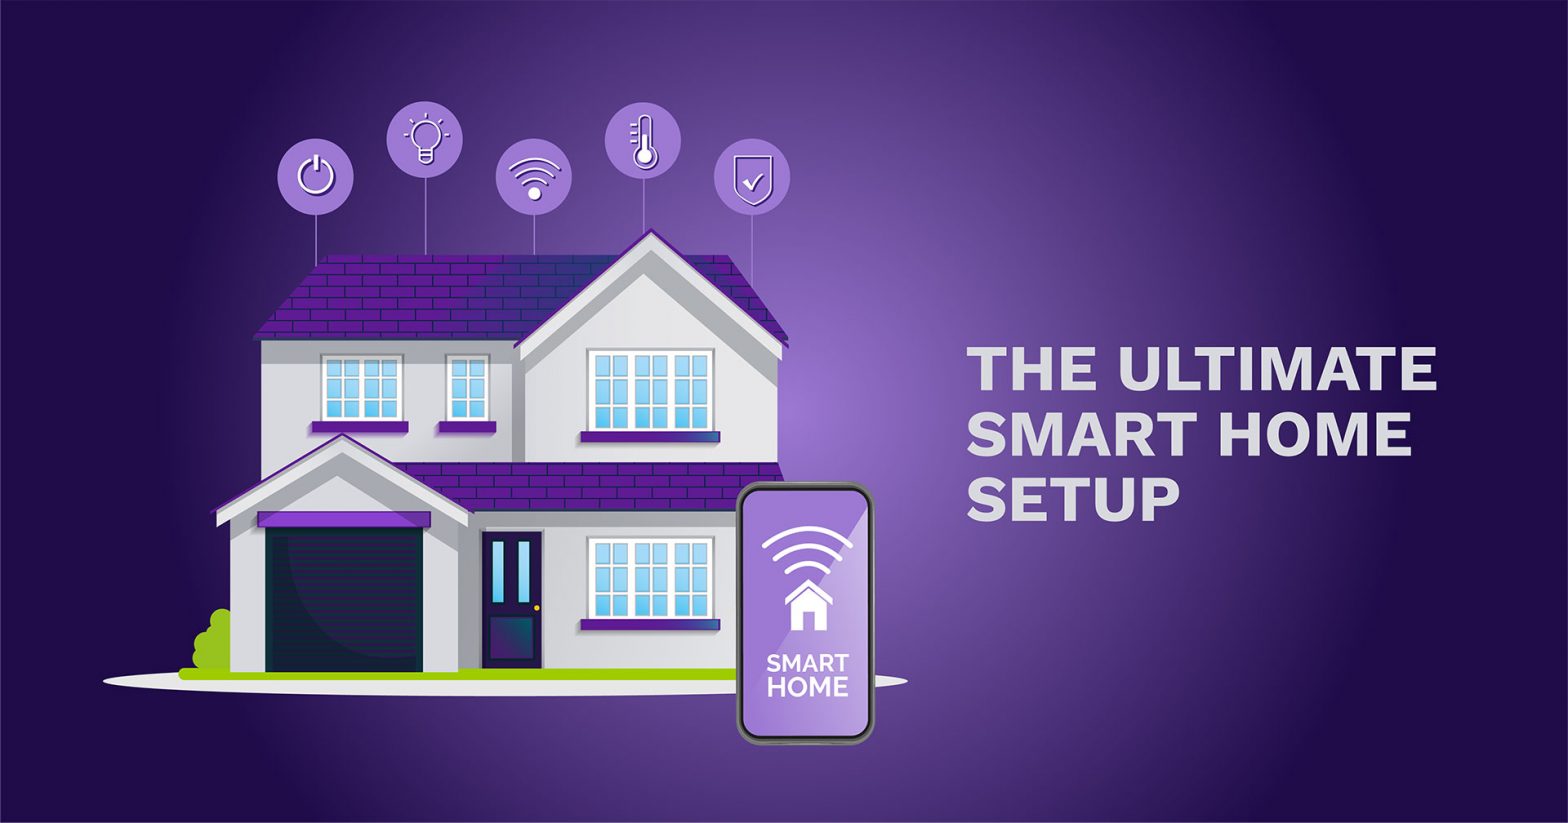 5 Smart Home Products for the Ultimate Home Setup